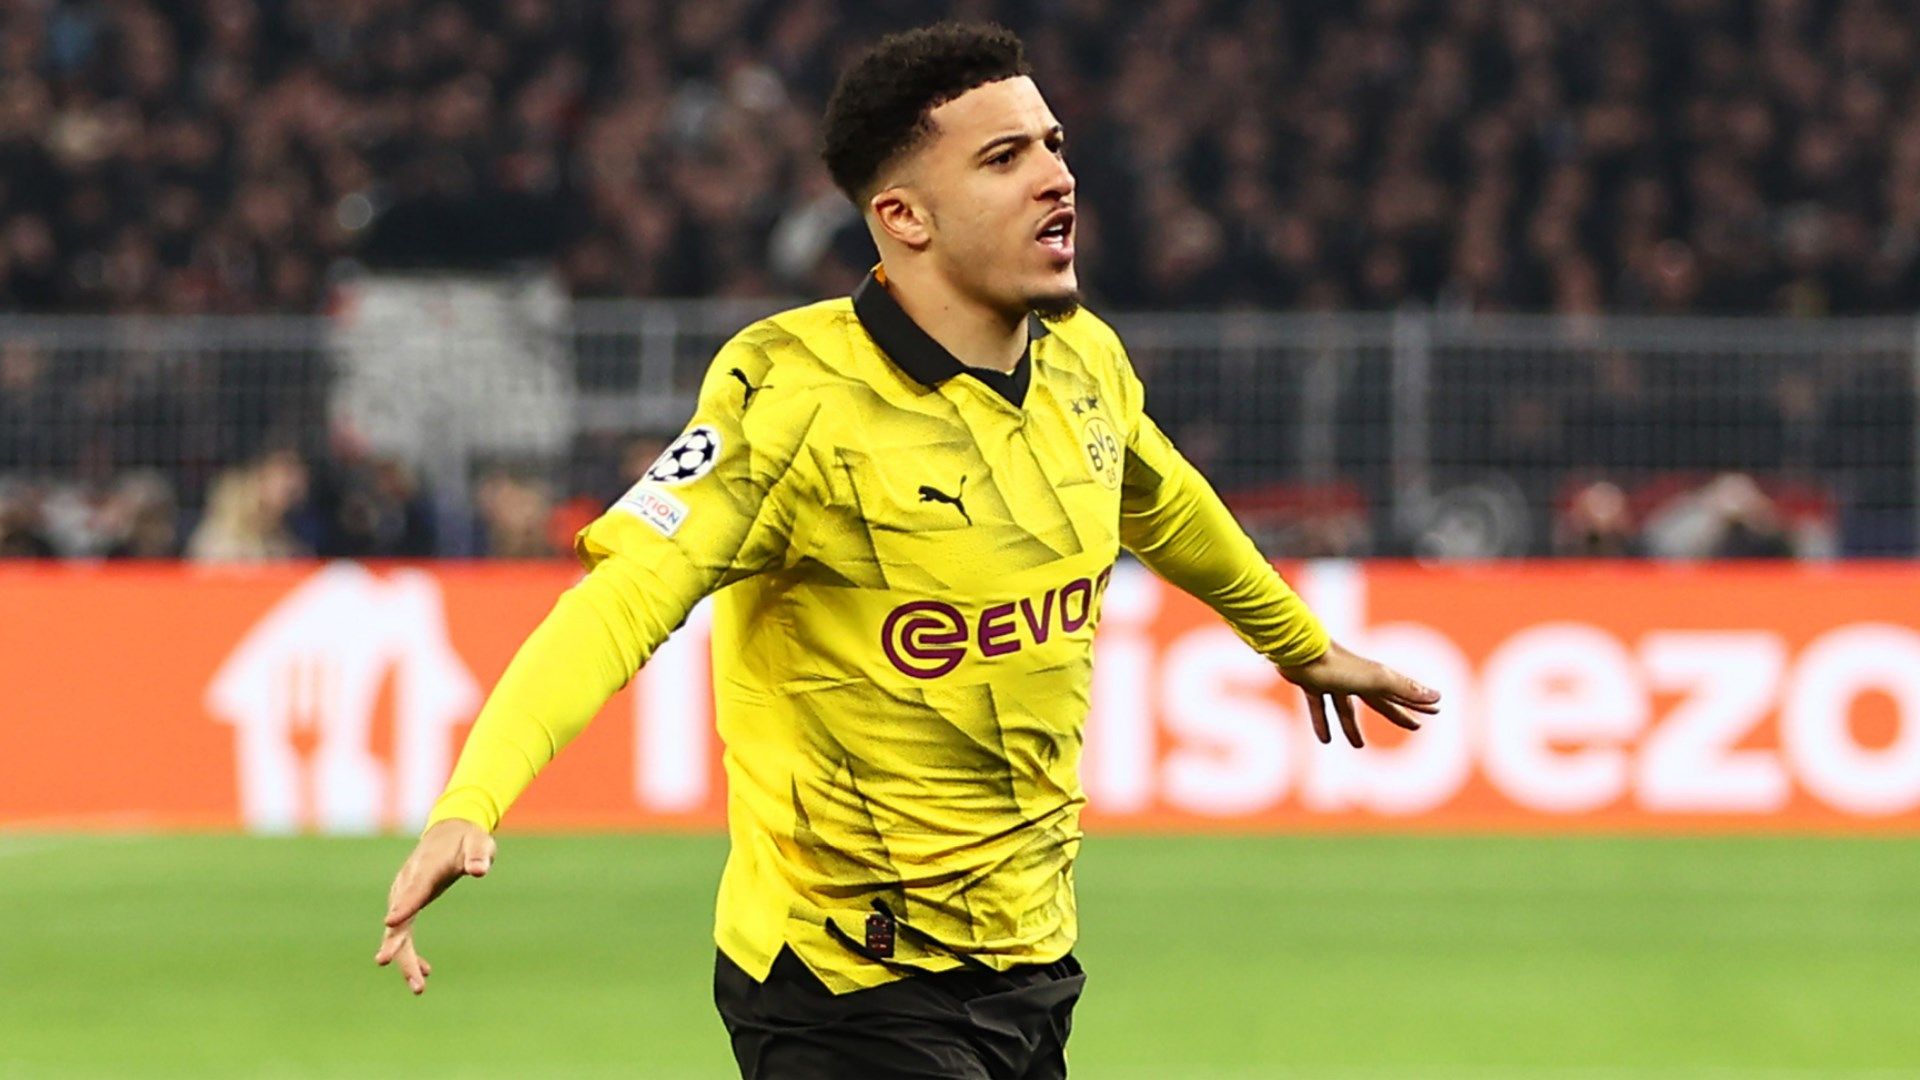 Jadon Sancho praised for proving his worth after leaving Man Utd 'under a cloud' as Rio Ferdinand insists even Borussia Dortmund star will be surprised by Champions League progress